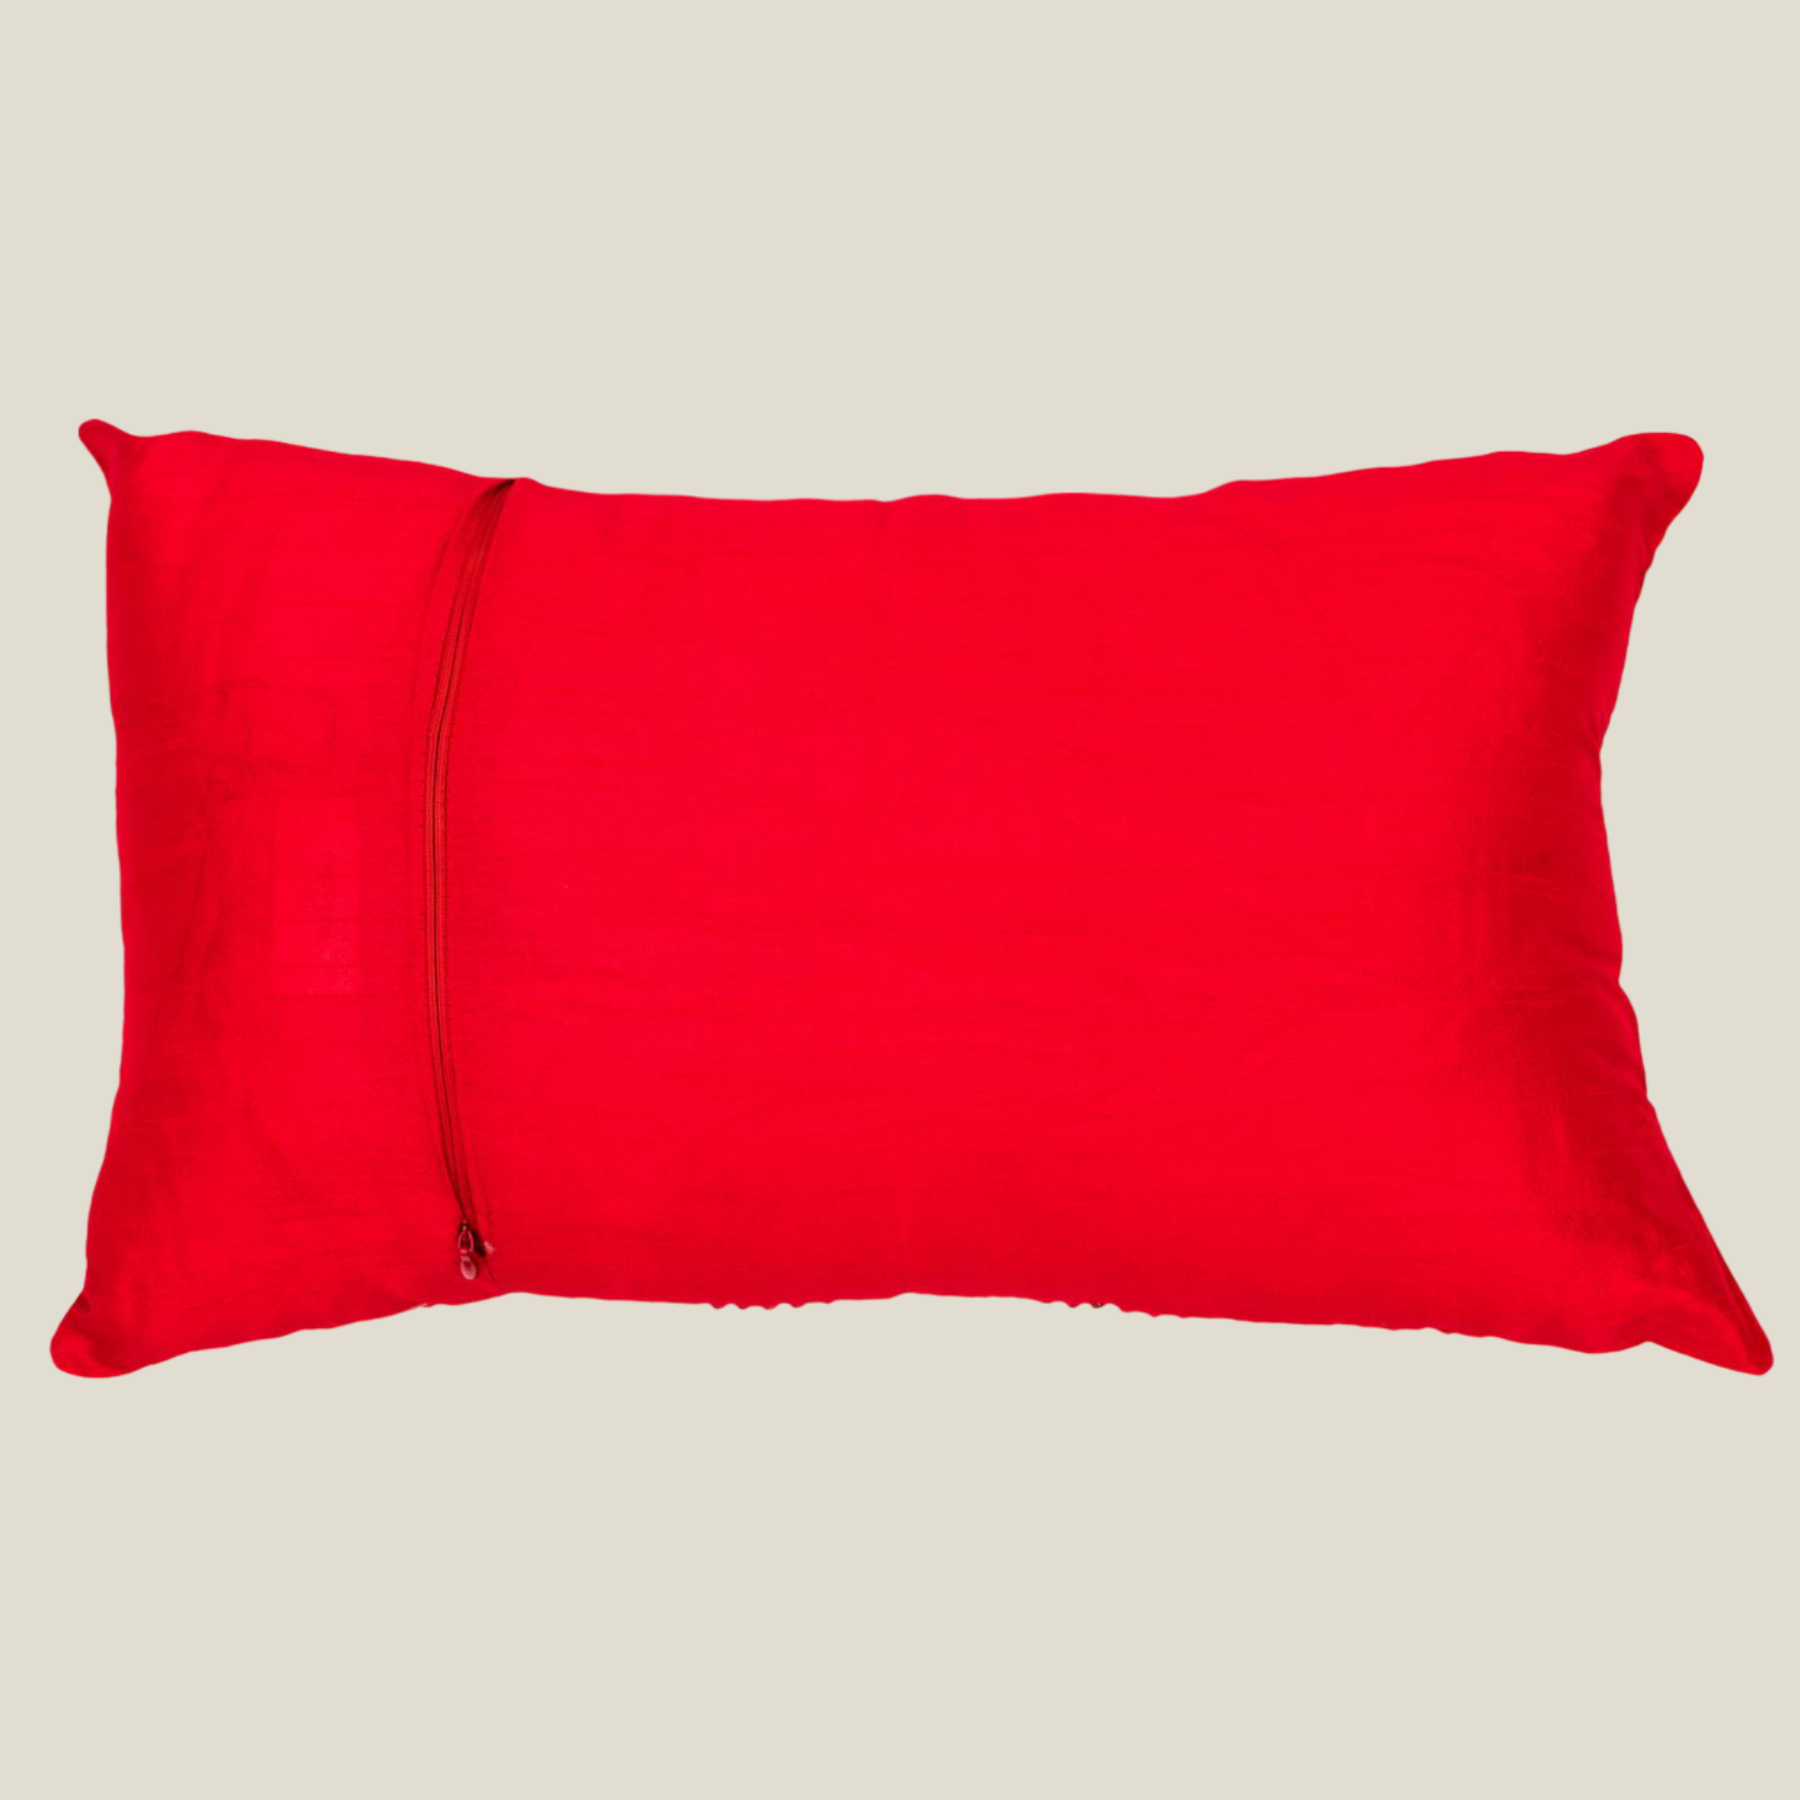 The Luxelife Handcrafted Red Cushion Cover (Zigzag Embroidery)